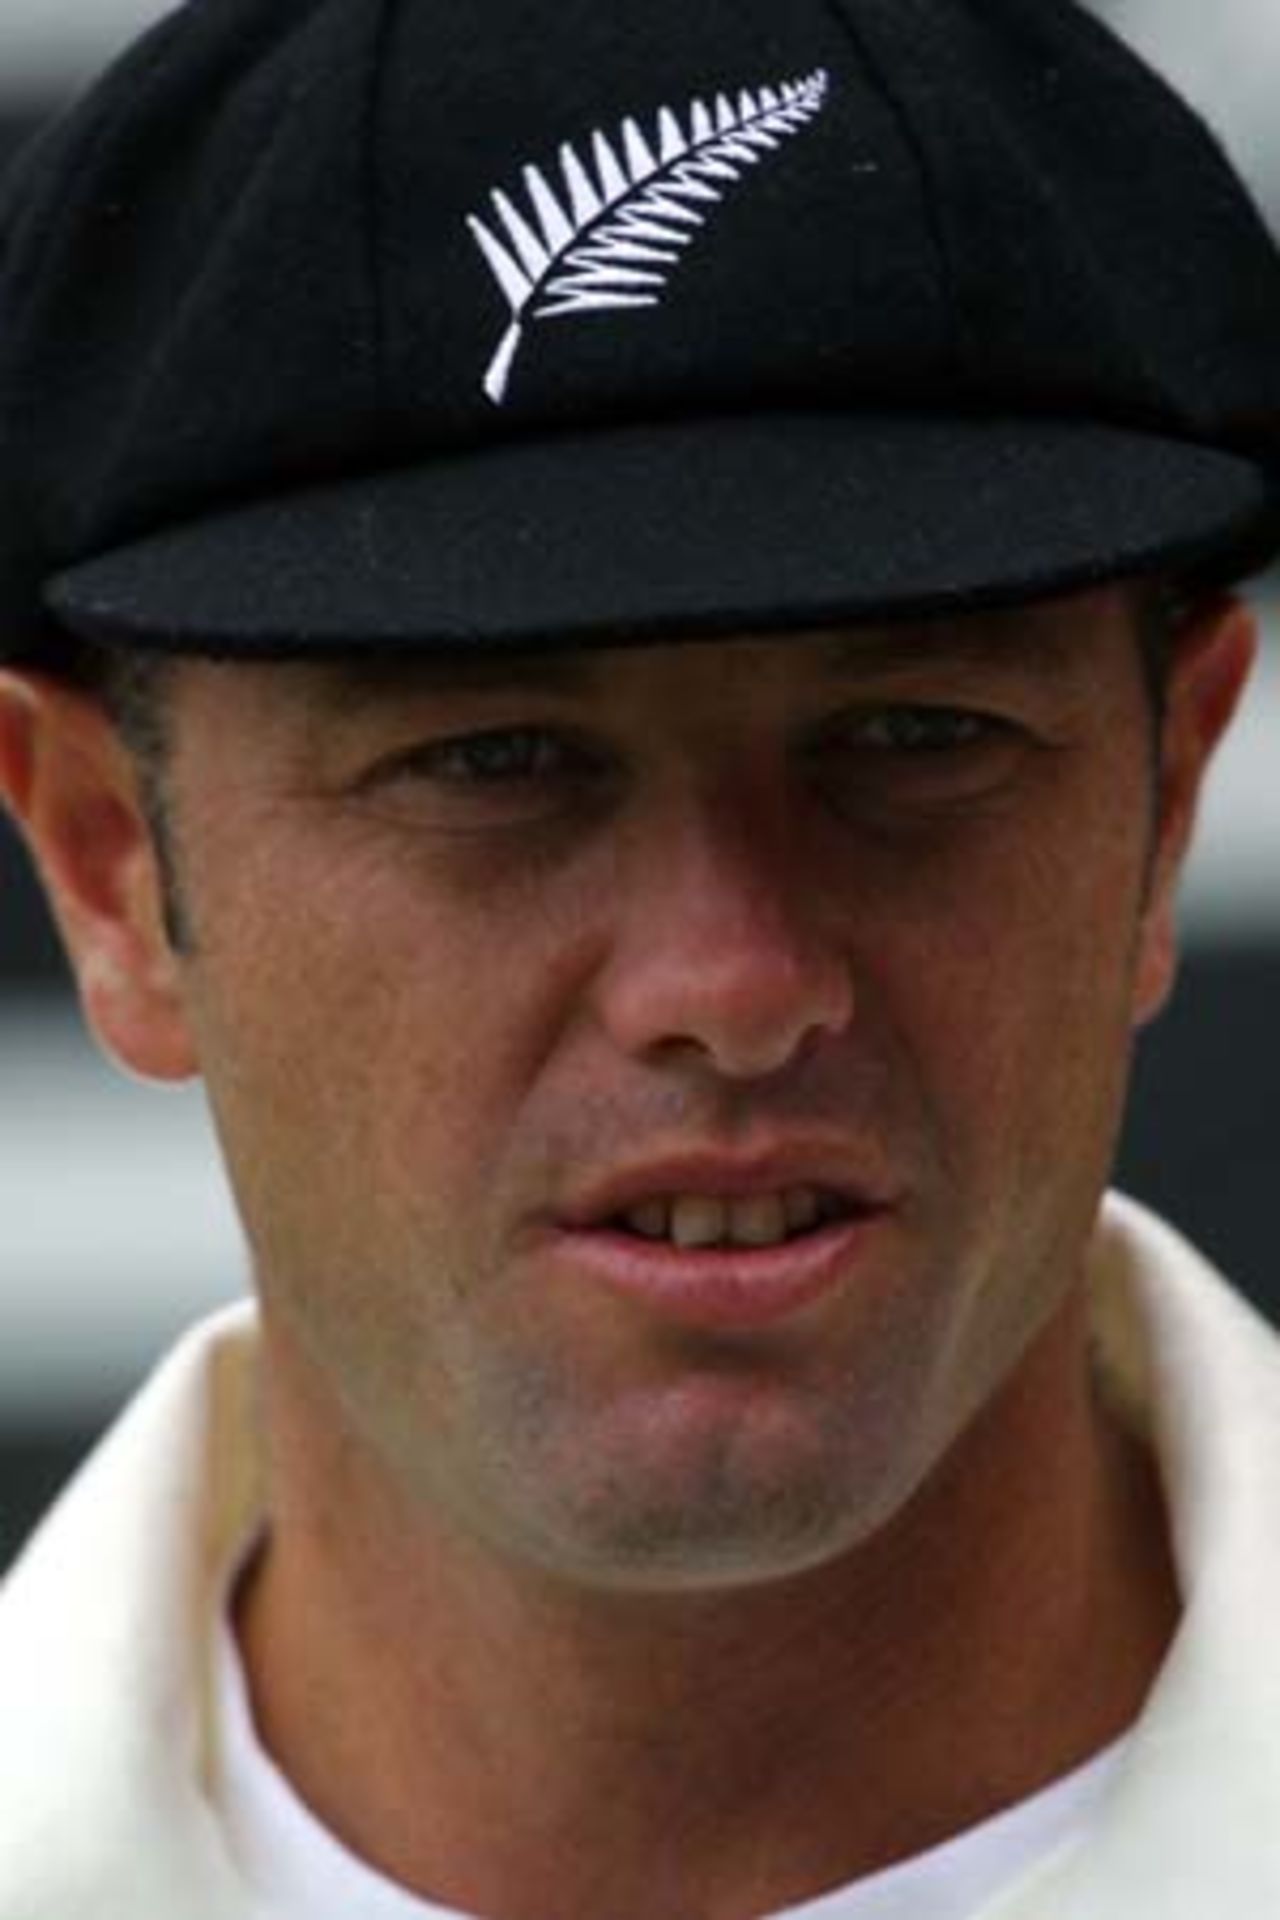 New Zealand opening batsman Mark Richardson while in the field. 1st Test: New Zealand v Pakistan at Eden Park, Auckland, 8-12 March 2001 (8 March 2001).